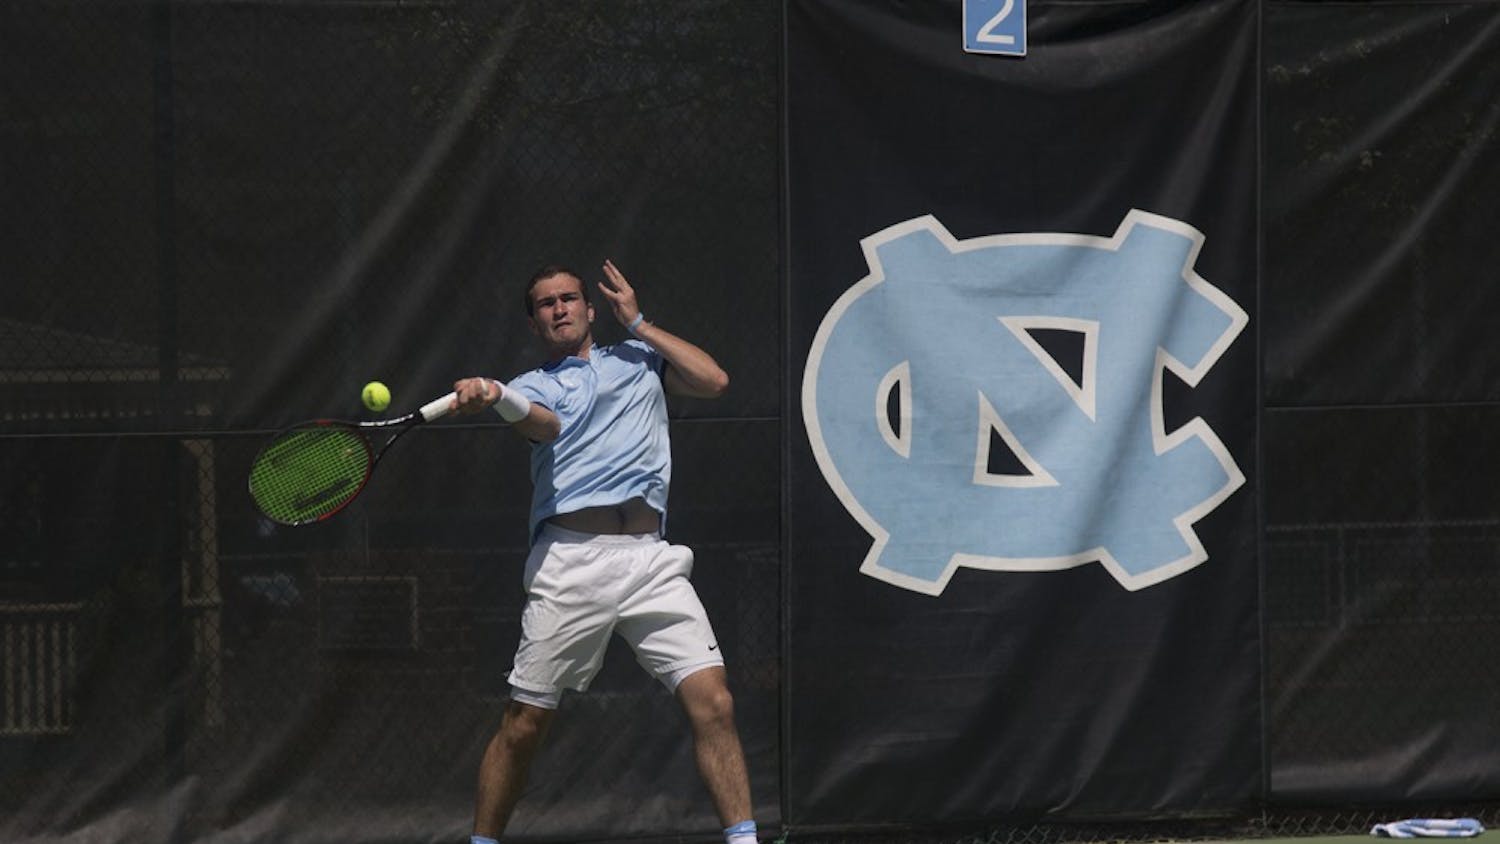 UNC Men's Tennis players William Blumberg (freshman, left) and Robert Kelly (junior, right) celebrate a point during their doubles match on Sunday afternoon against Florida State players Jose Garcia (junior) and Lucas Poullain (junior).